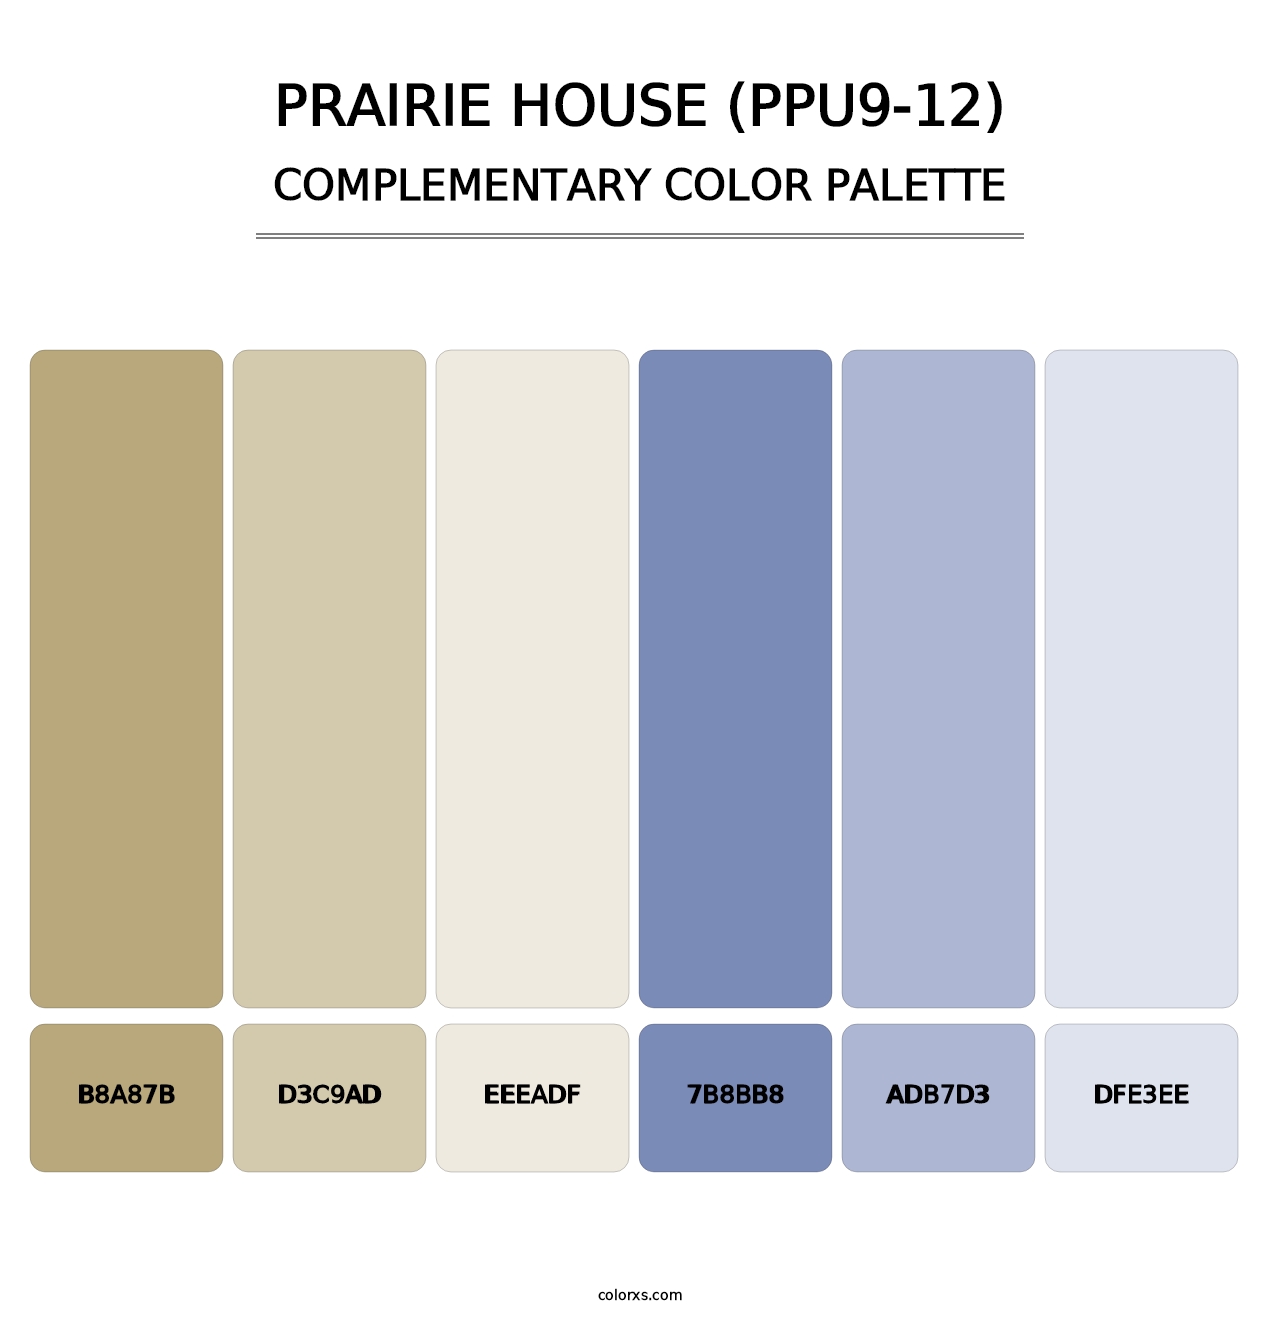 Prairie House (PPU9-12) - Complementary Color Palette